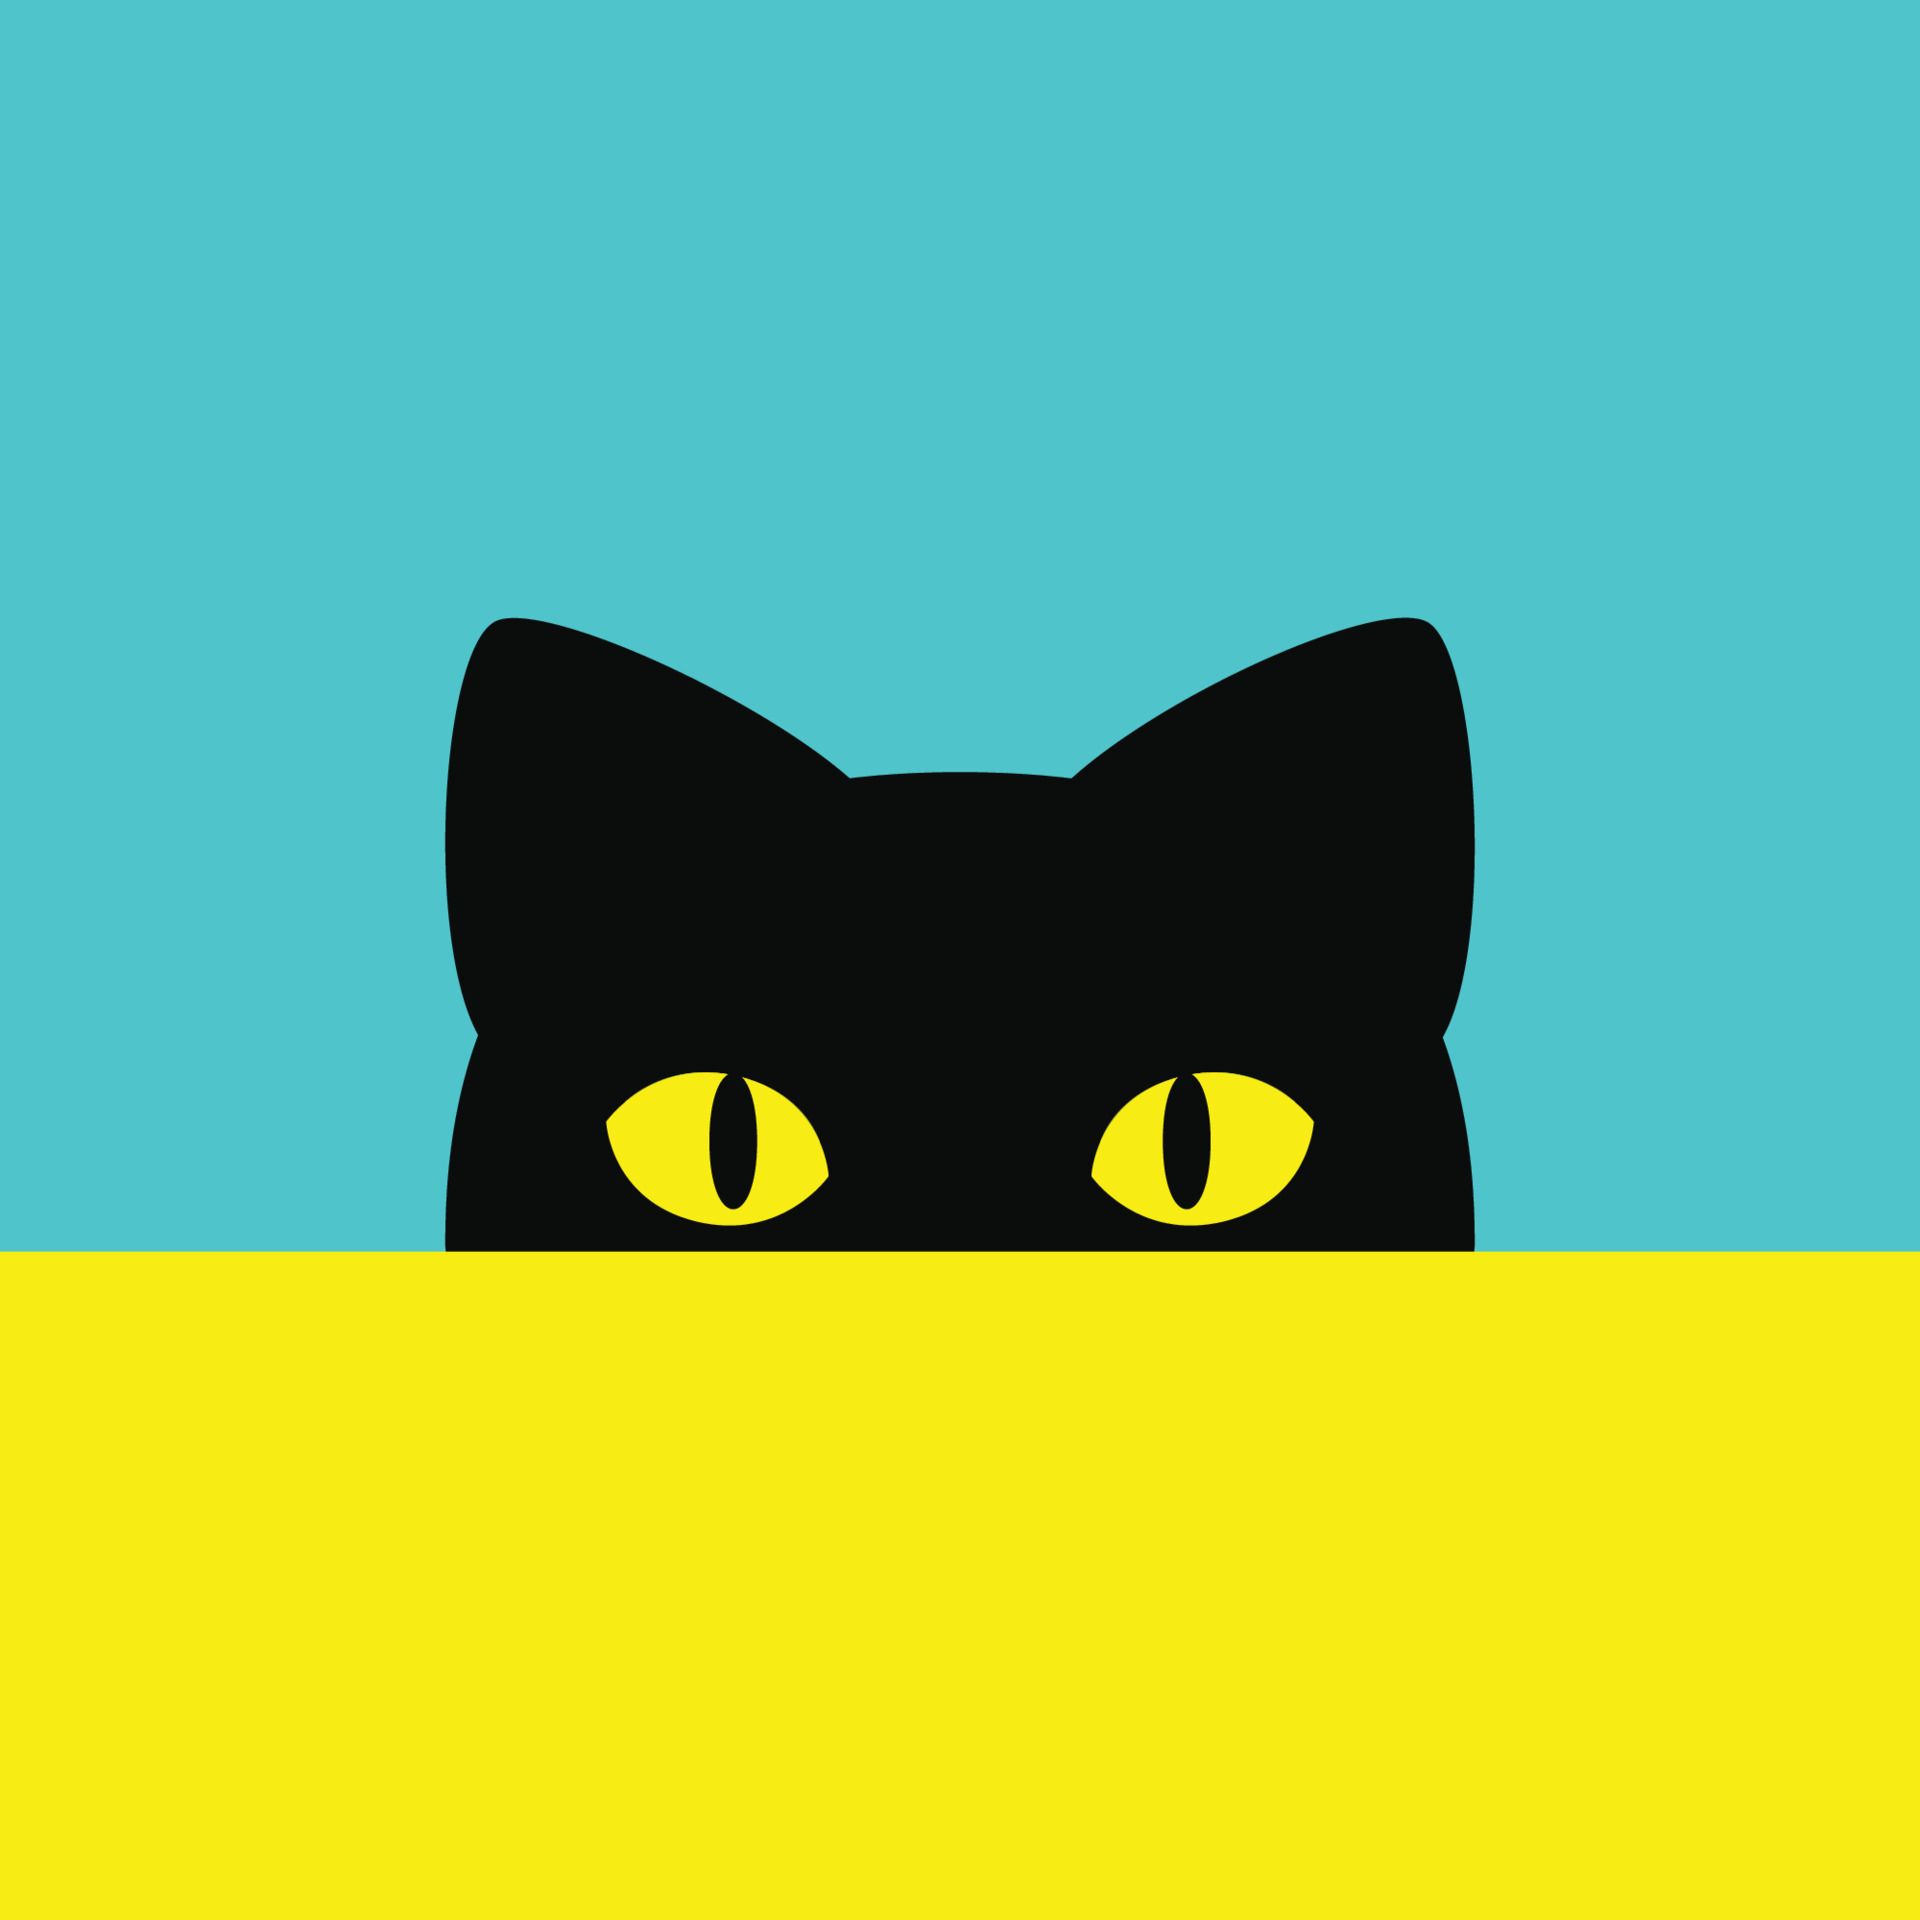 A black cat with yellow eyes peeking out from behind something - Cat